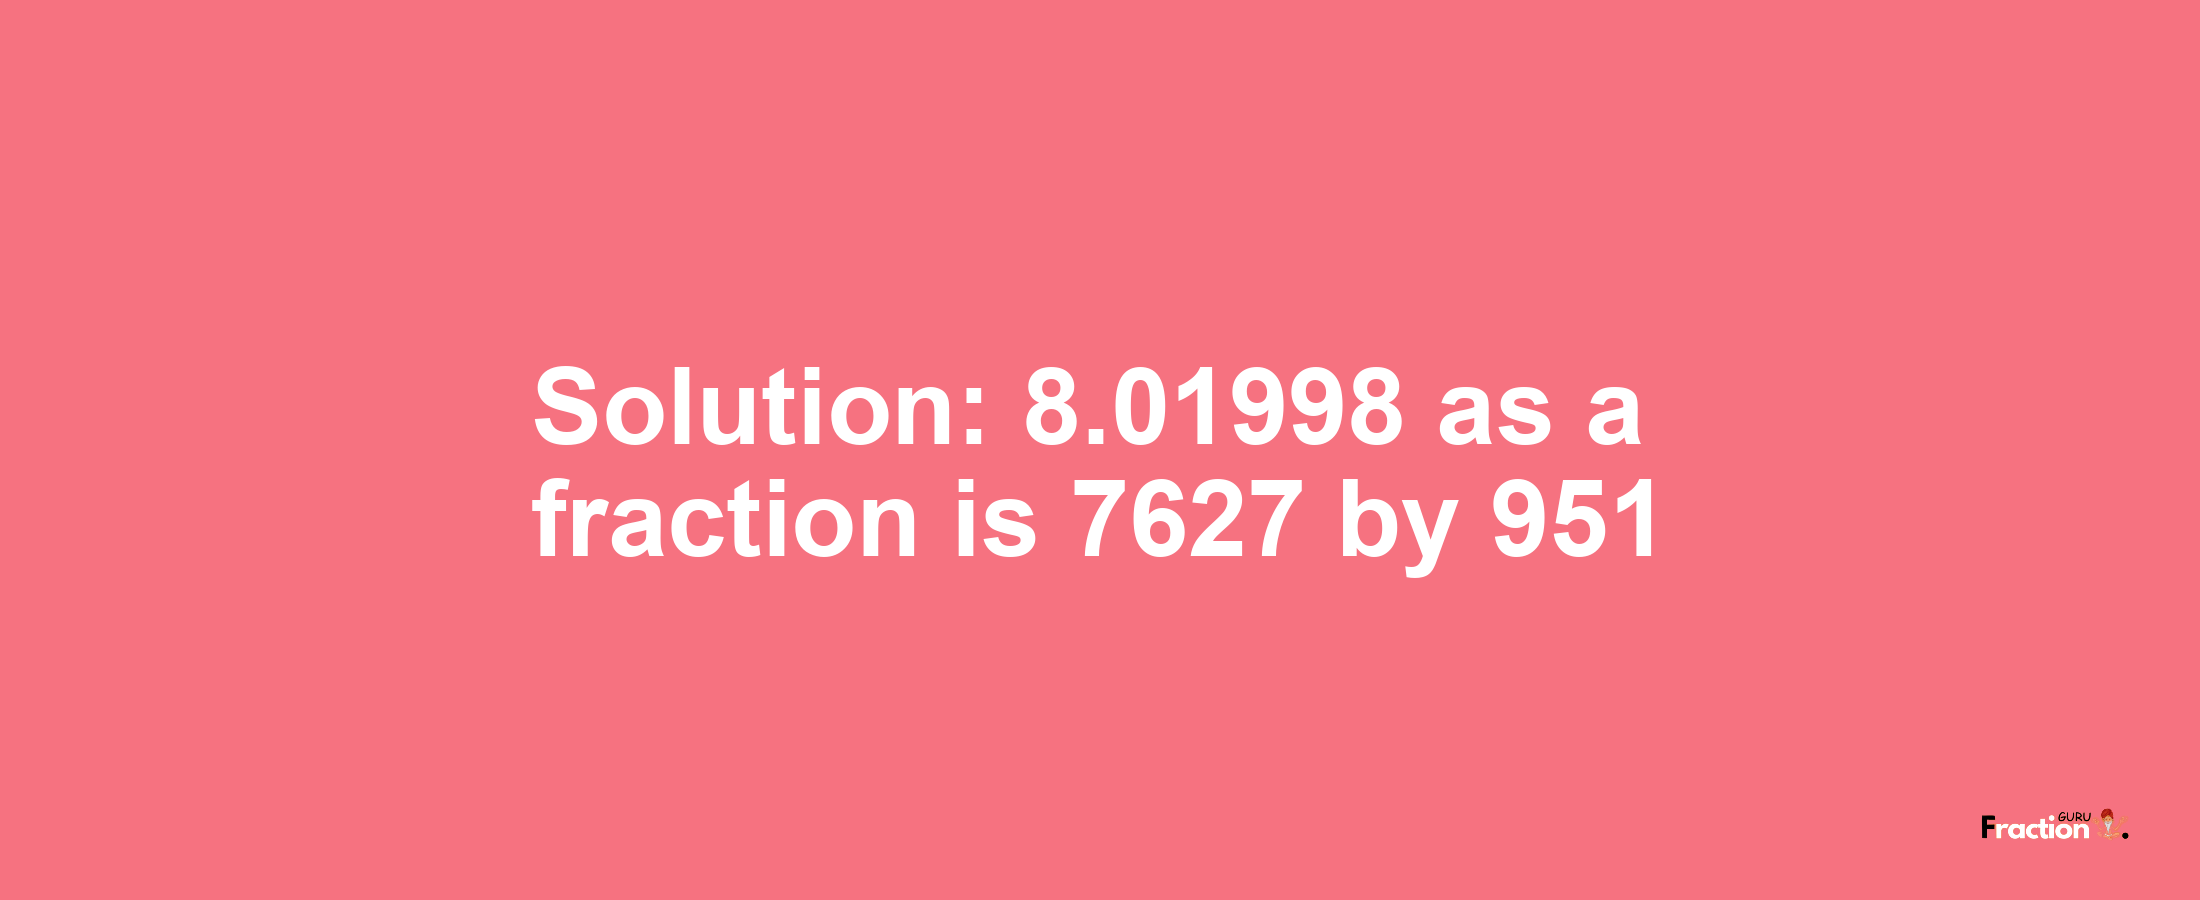 Solution:8.01998 as a fraction is 7627/951